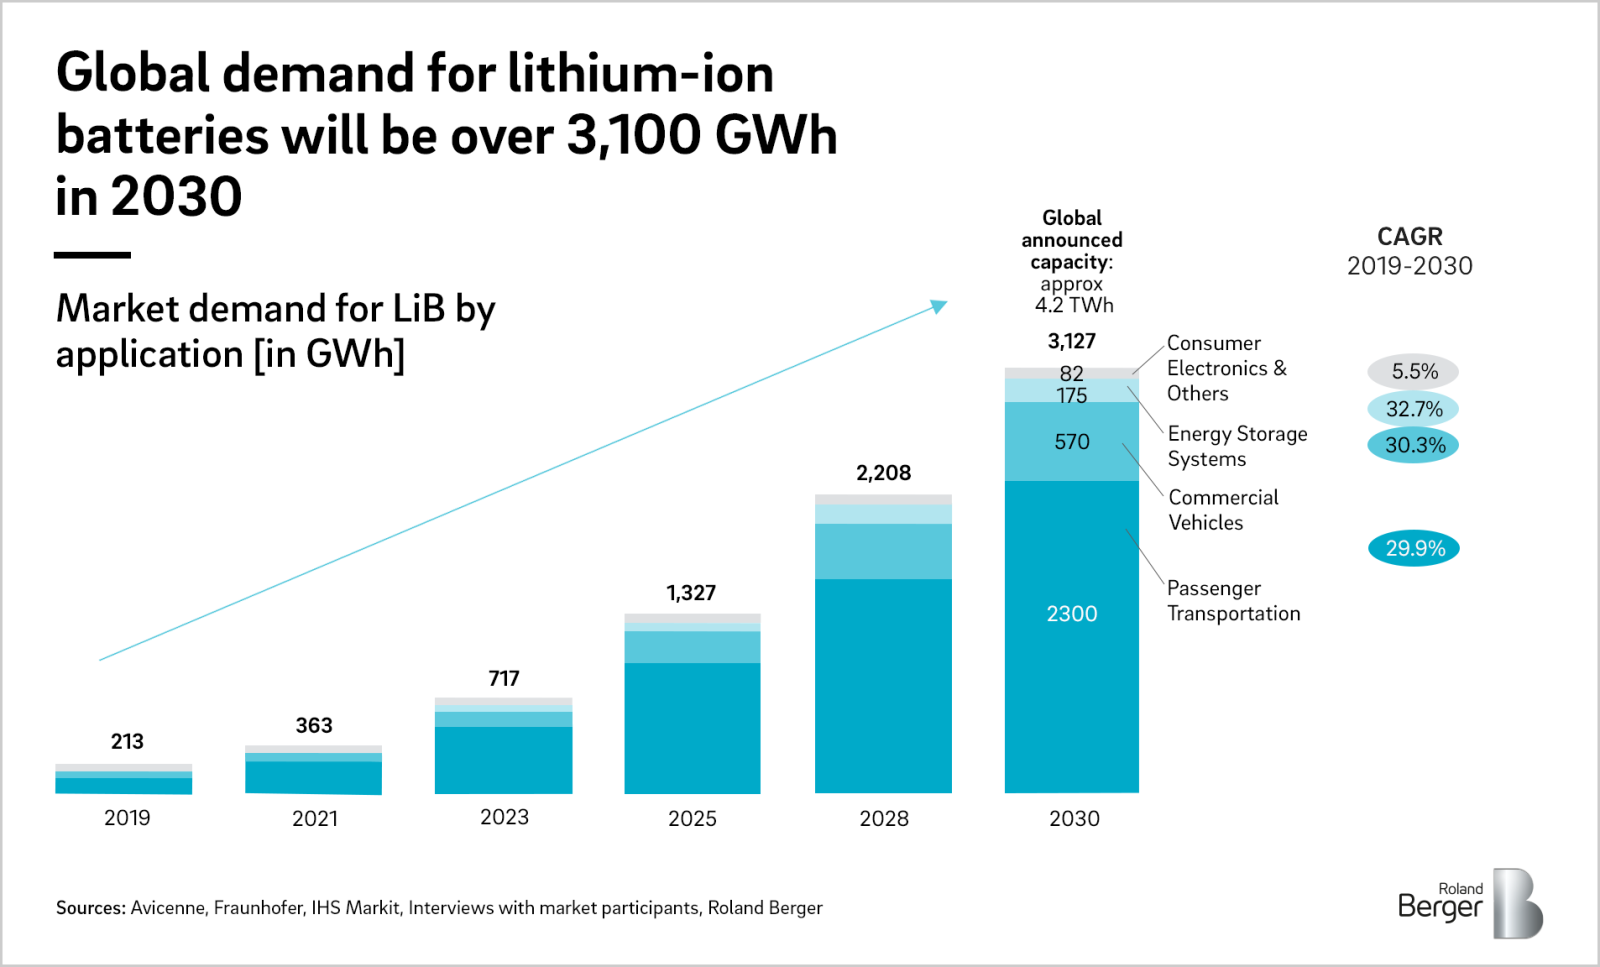 lithium uses today